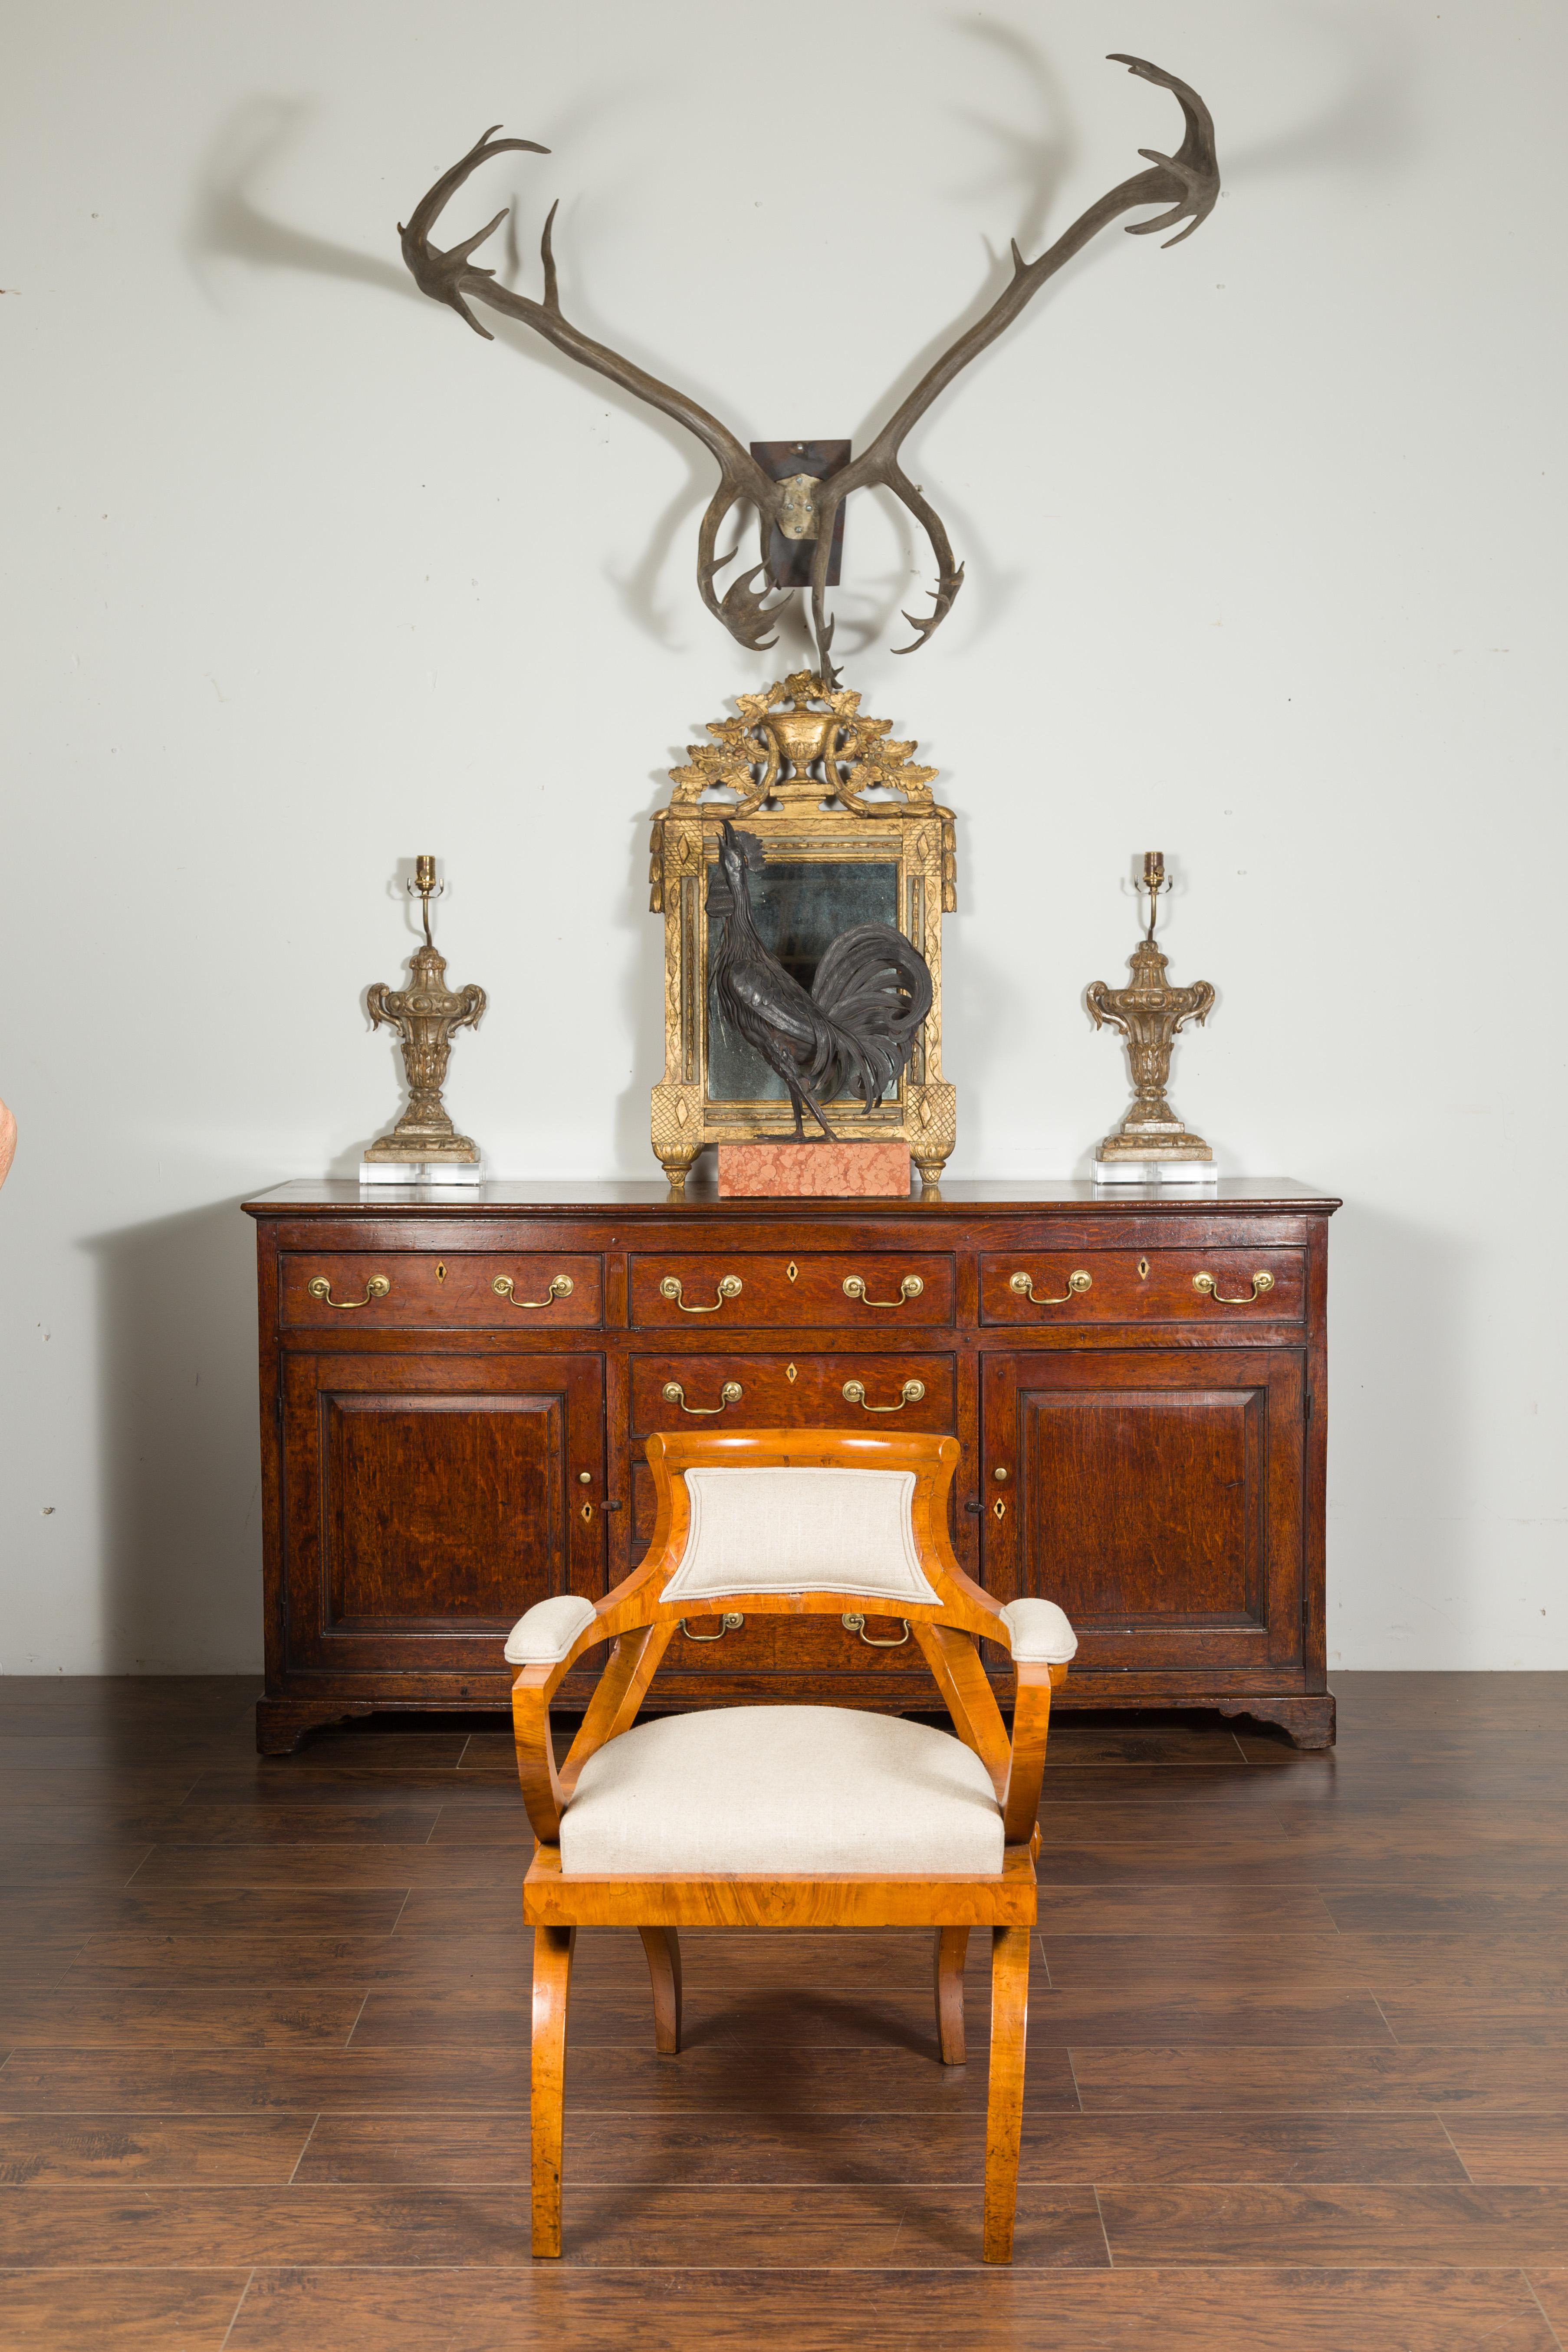 A Biedermeier style walnut veneered armchair from the late 19th century, with arching base and new upholstery. Created in Austria during the third quarter of the 19th century, this Biedermeier style armchair features a small slanted back, flowing